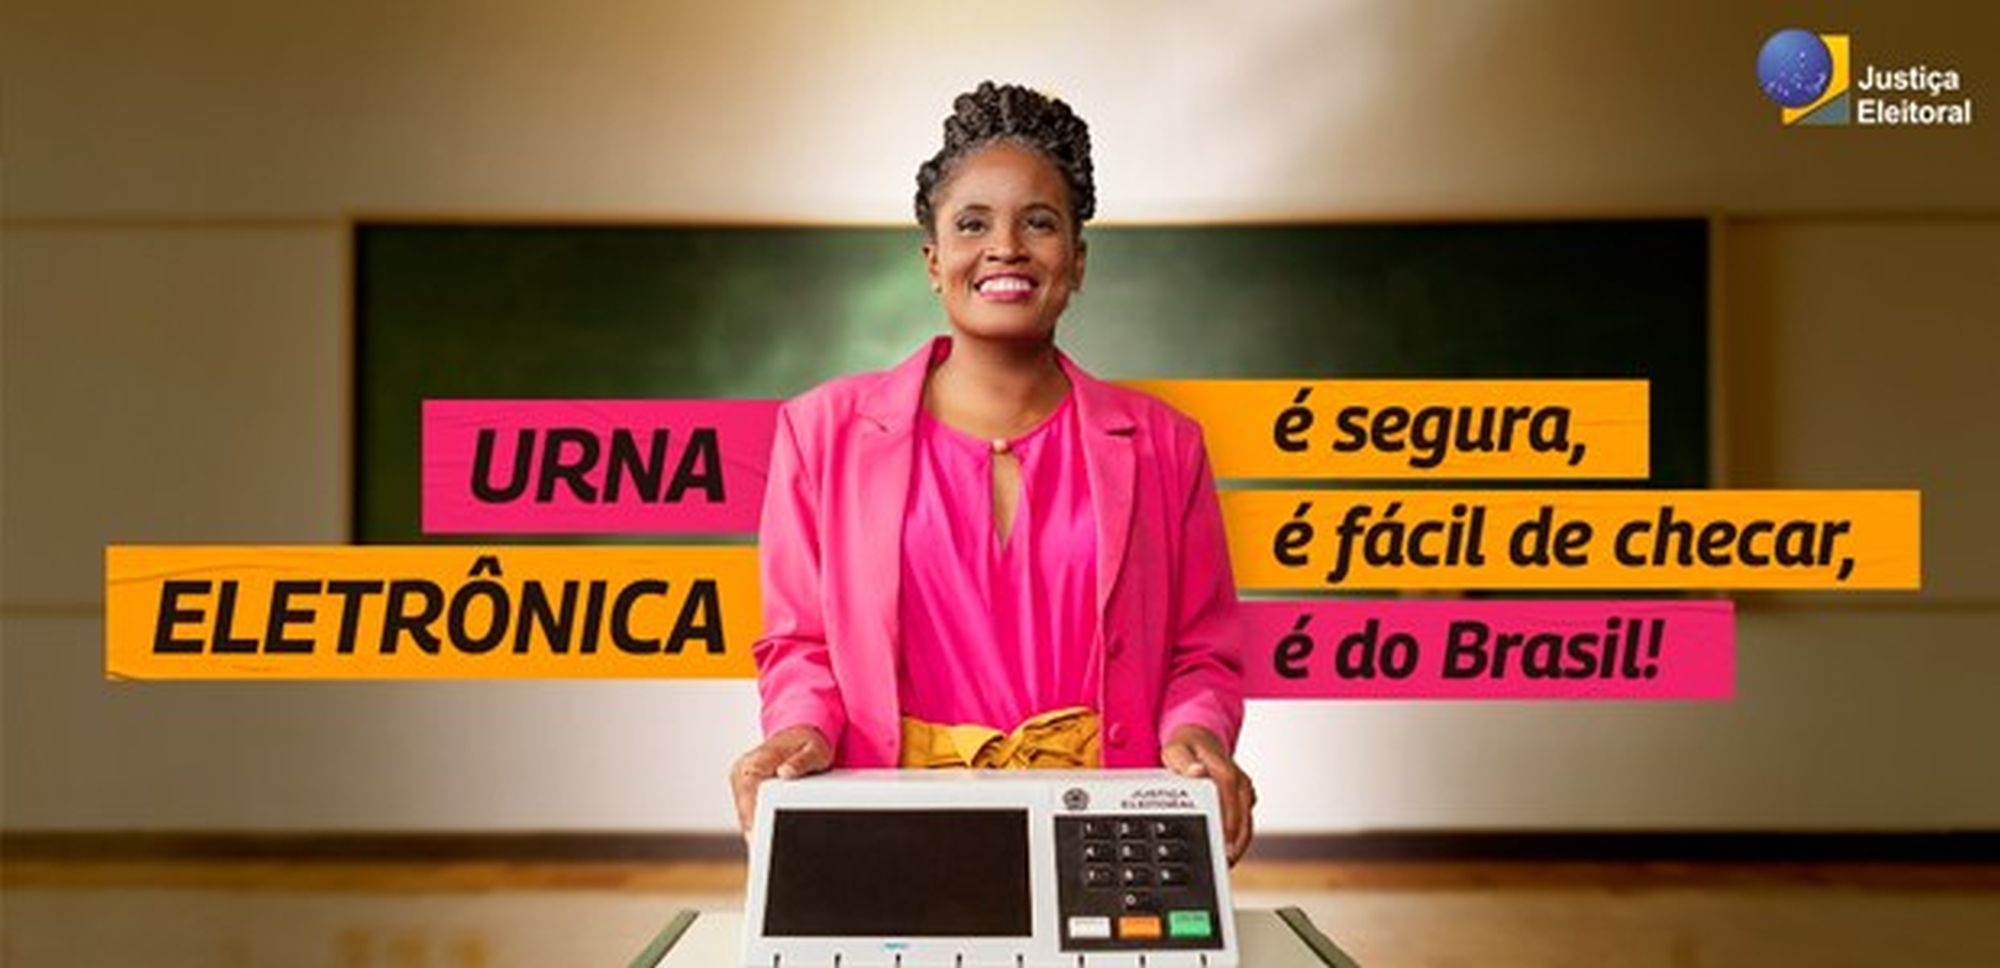 From the page of the Supreme Electoral Court, with philosopher, Djamila Ribeiro. “Electronic Voting Machines: it’s safe, it’s easy to check, it’s Brazil’s!”